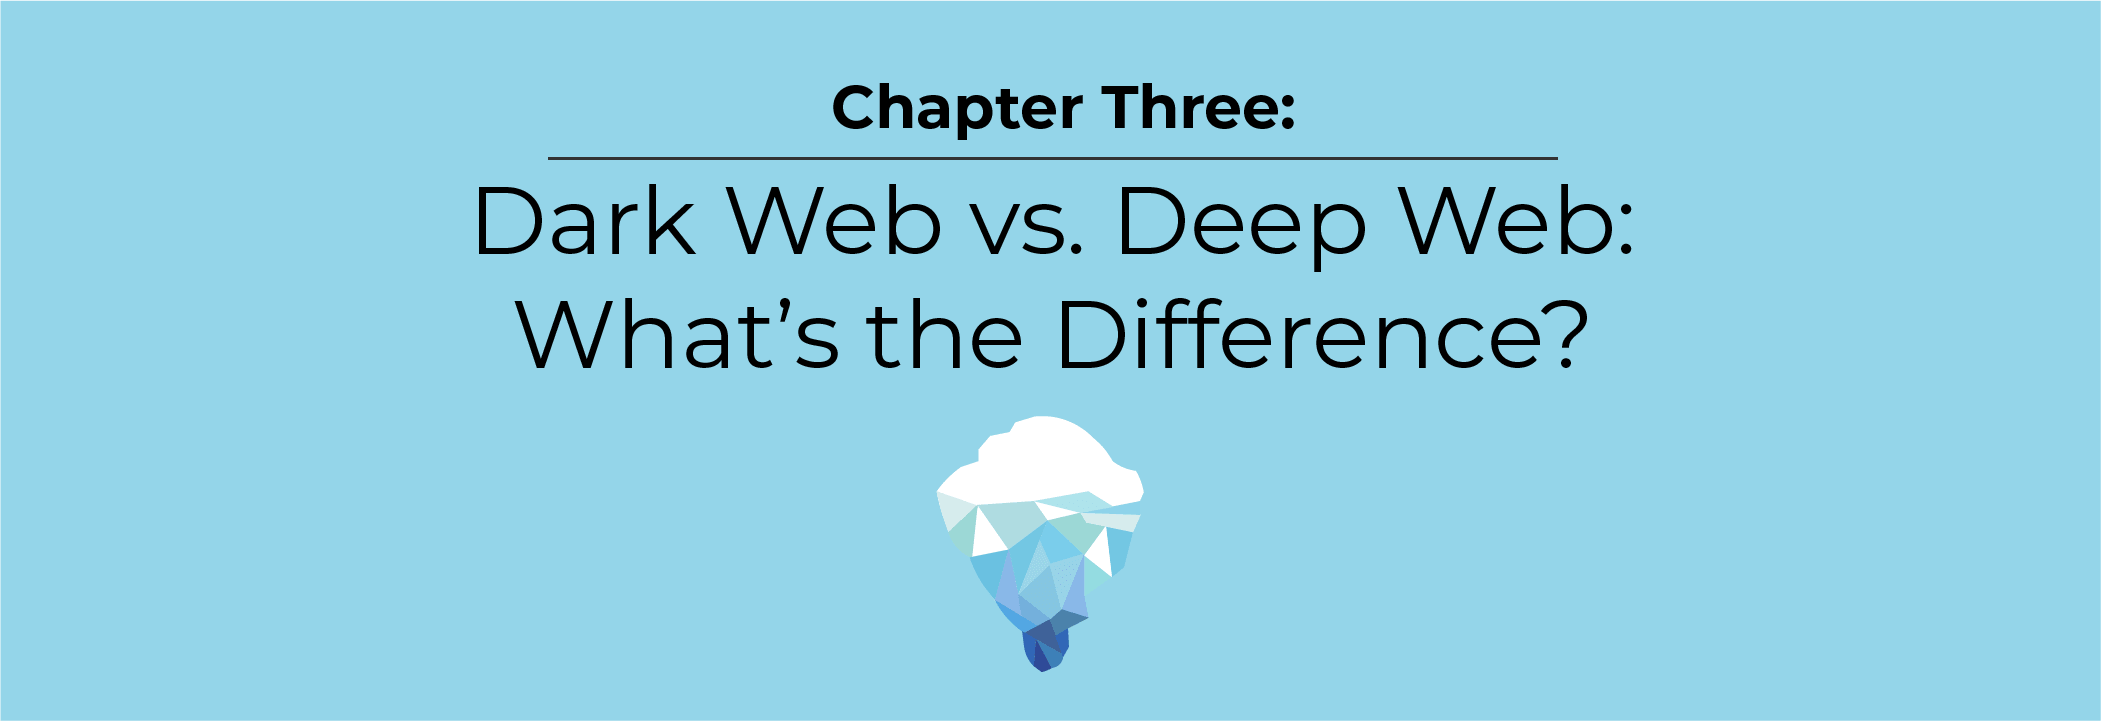 Dark Web vs. Deep Web: What's the Difference?